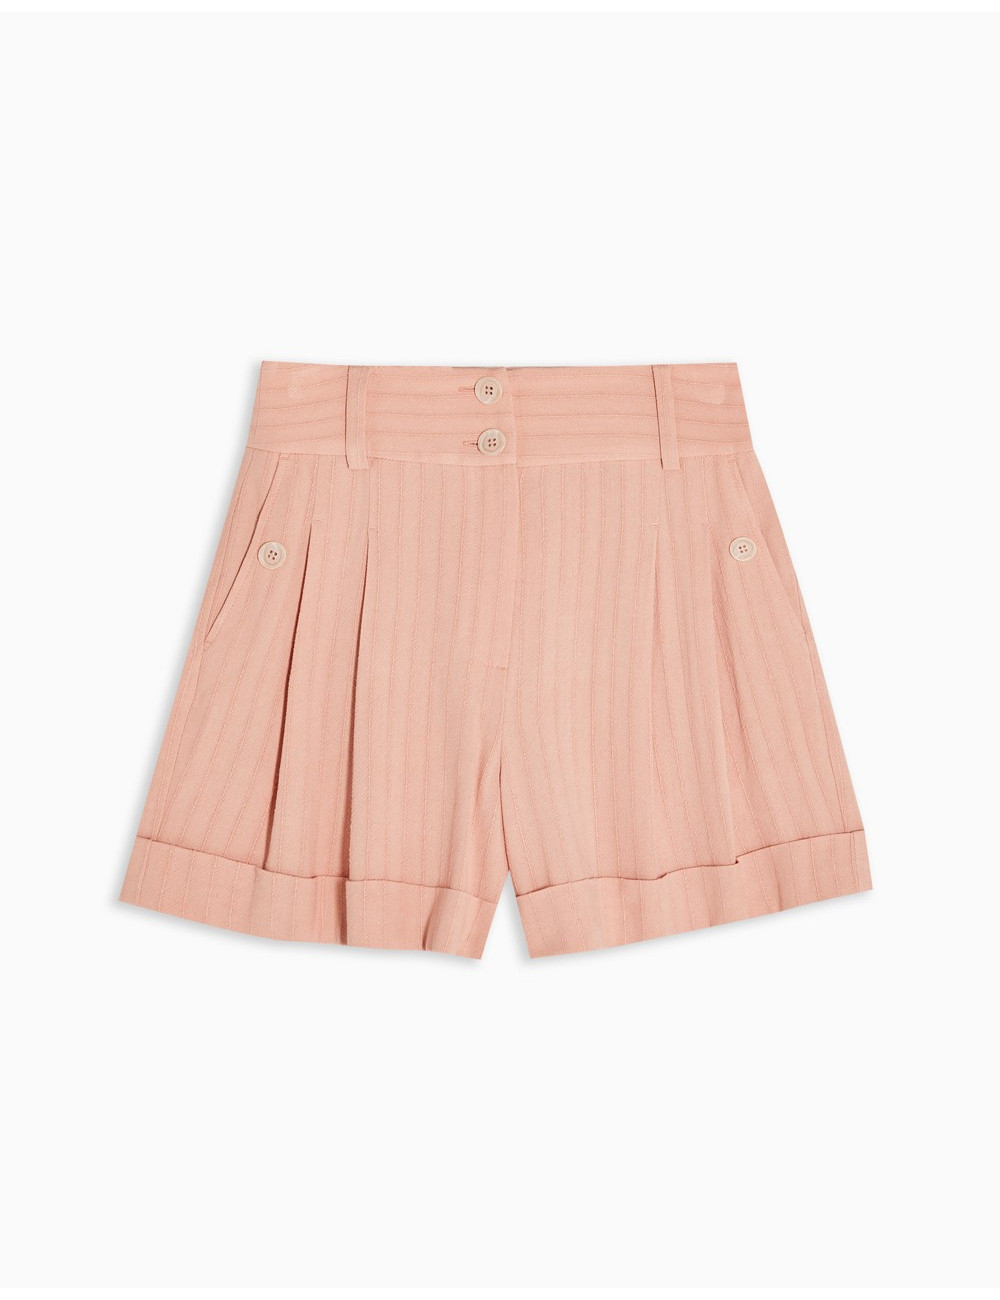 Topshop striped shorts in...